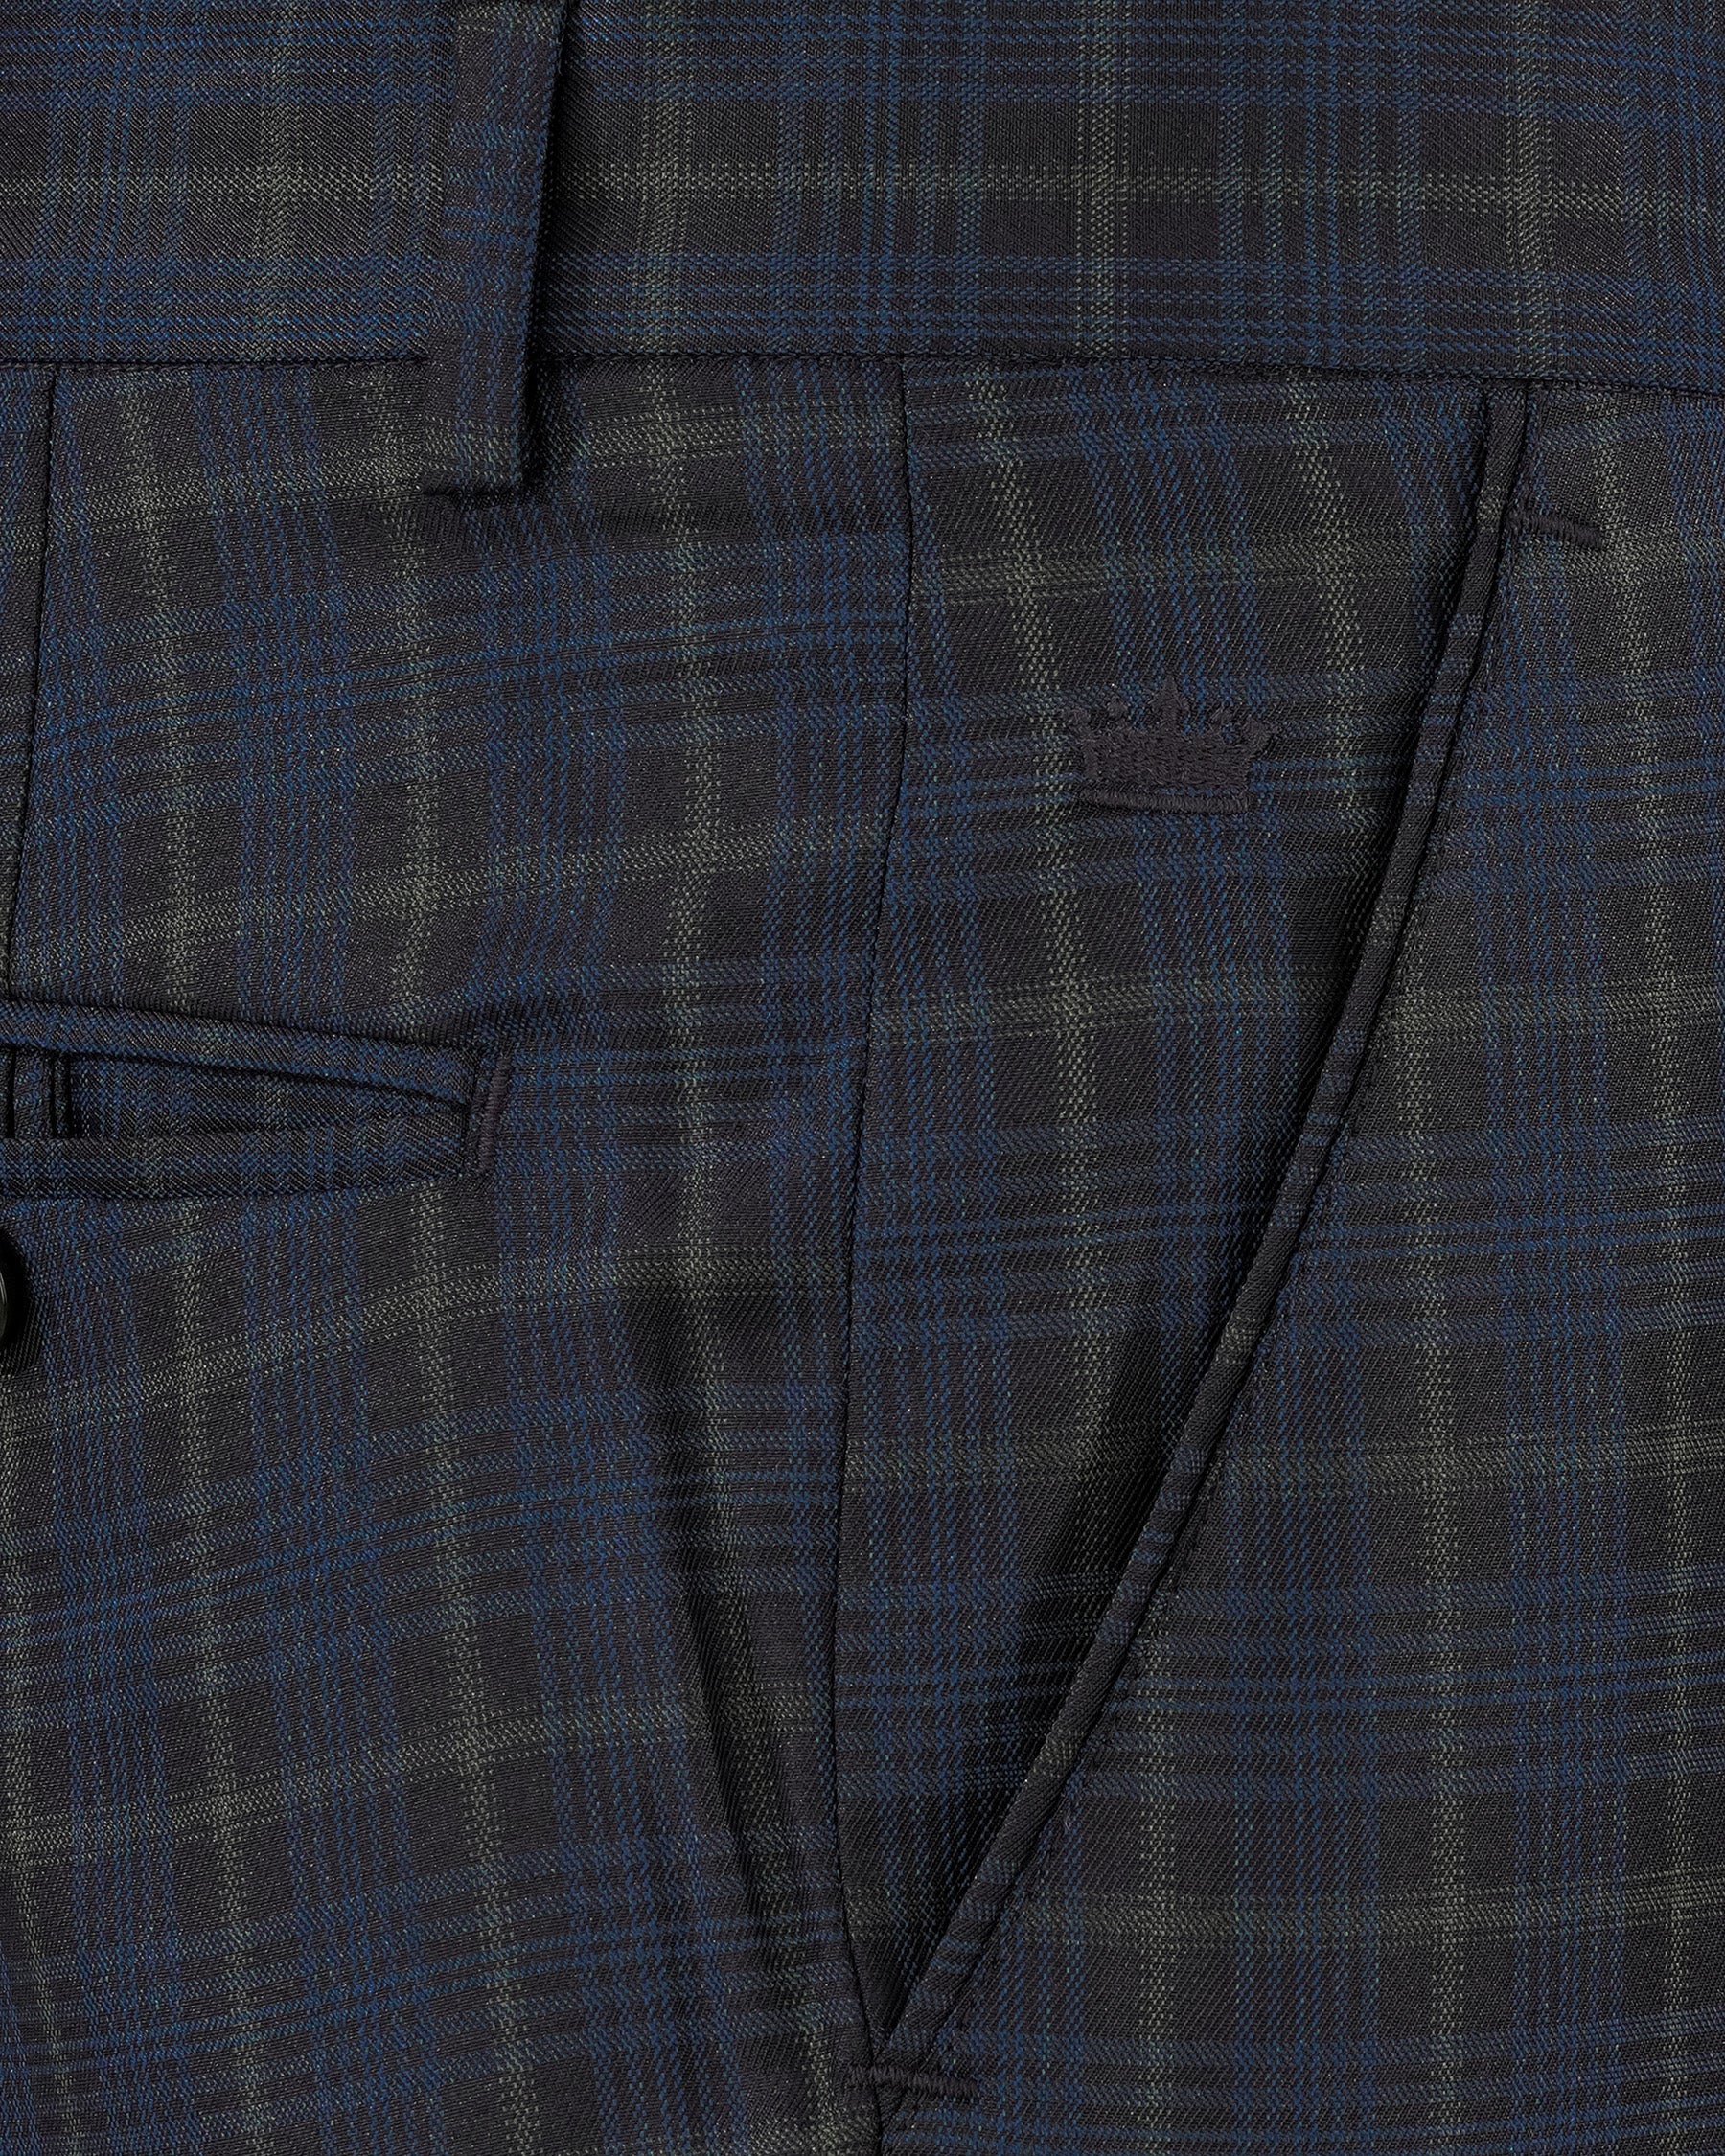 Fiord Navy Blue with Black Russian Plaid Pant